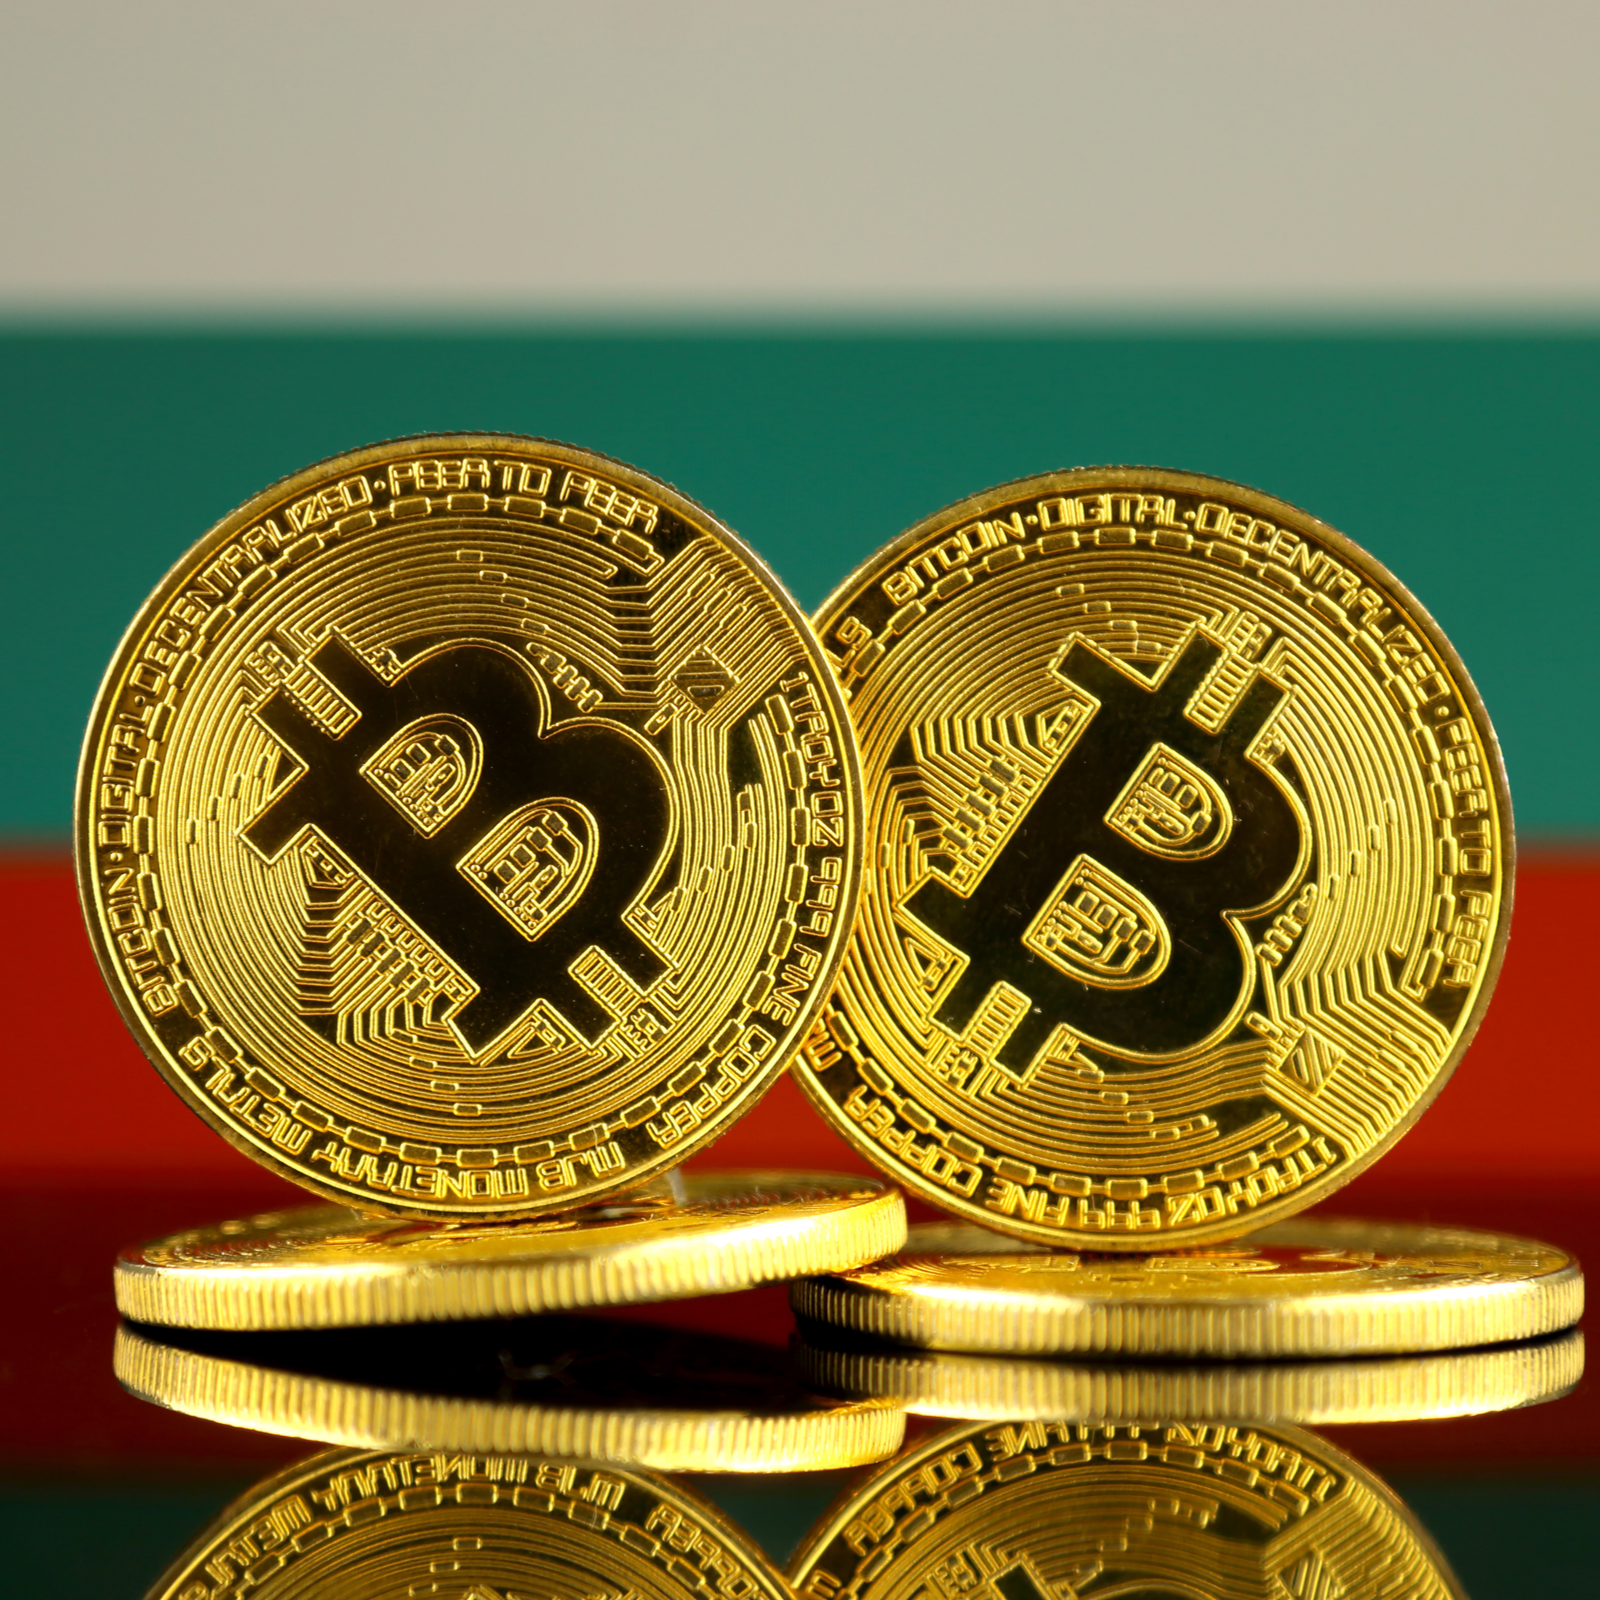 Bulgarian Official Denies Country Possessing $3.2 Billion USD Worth of Bitcoins